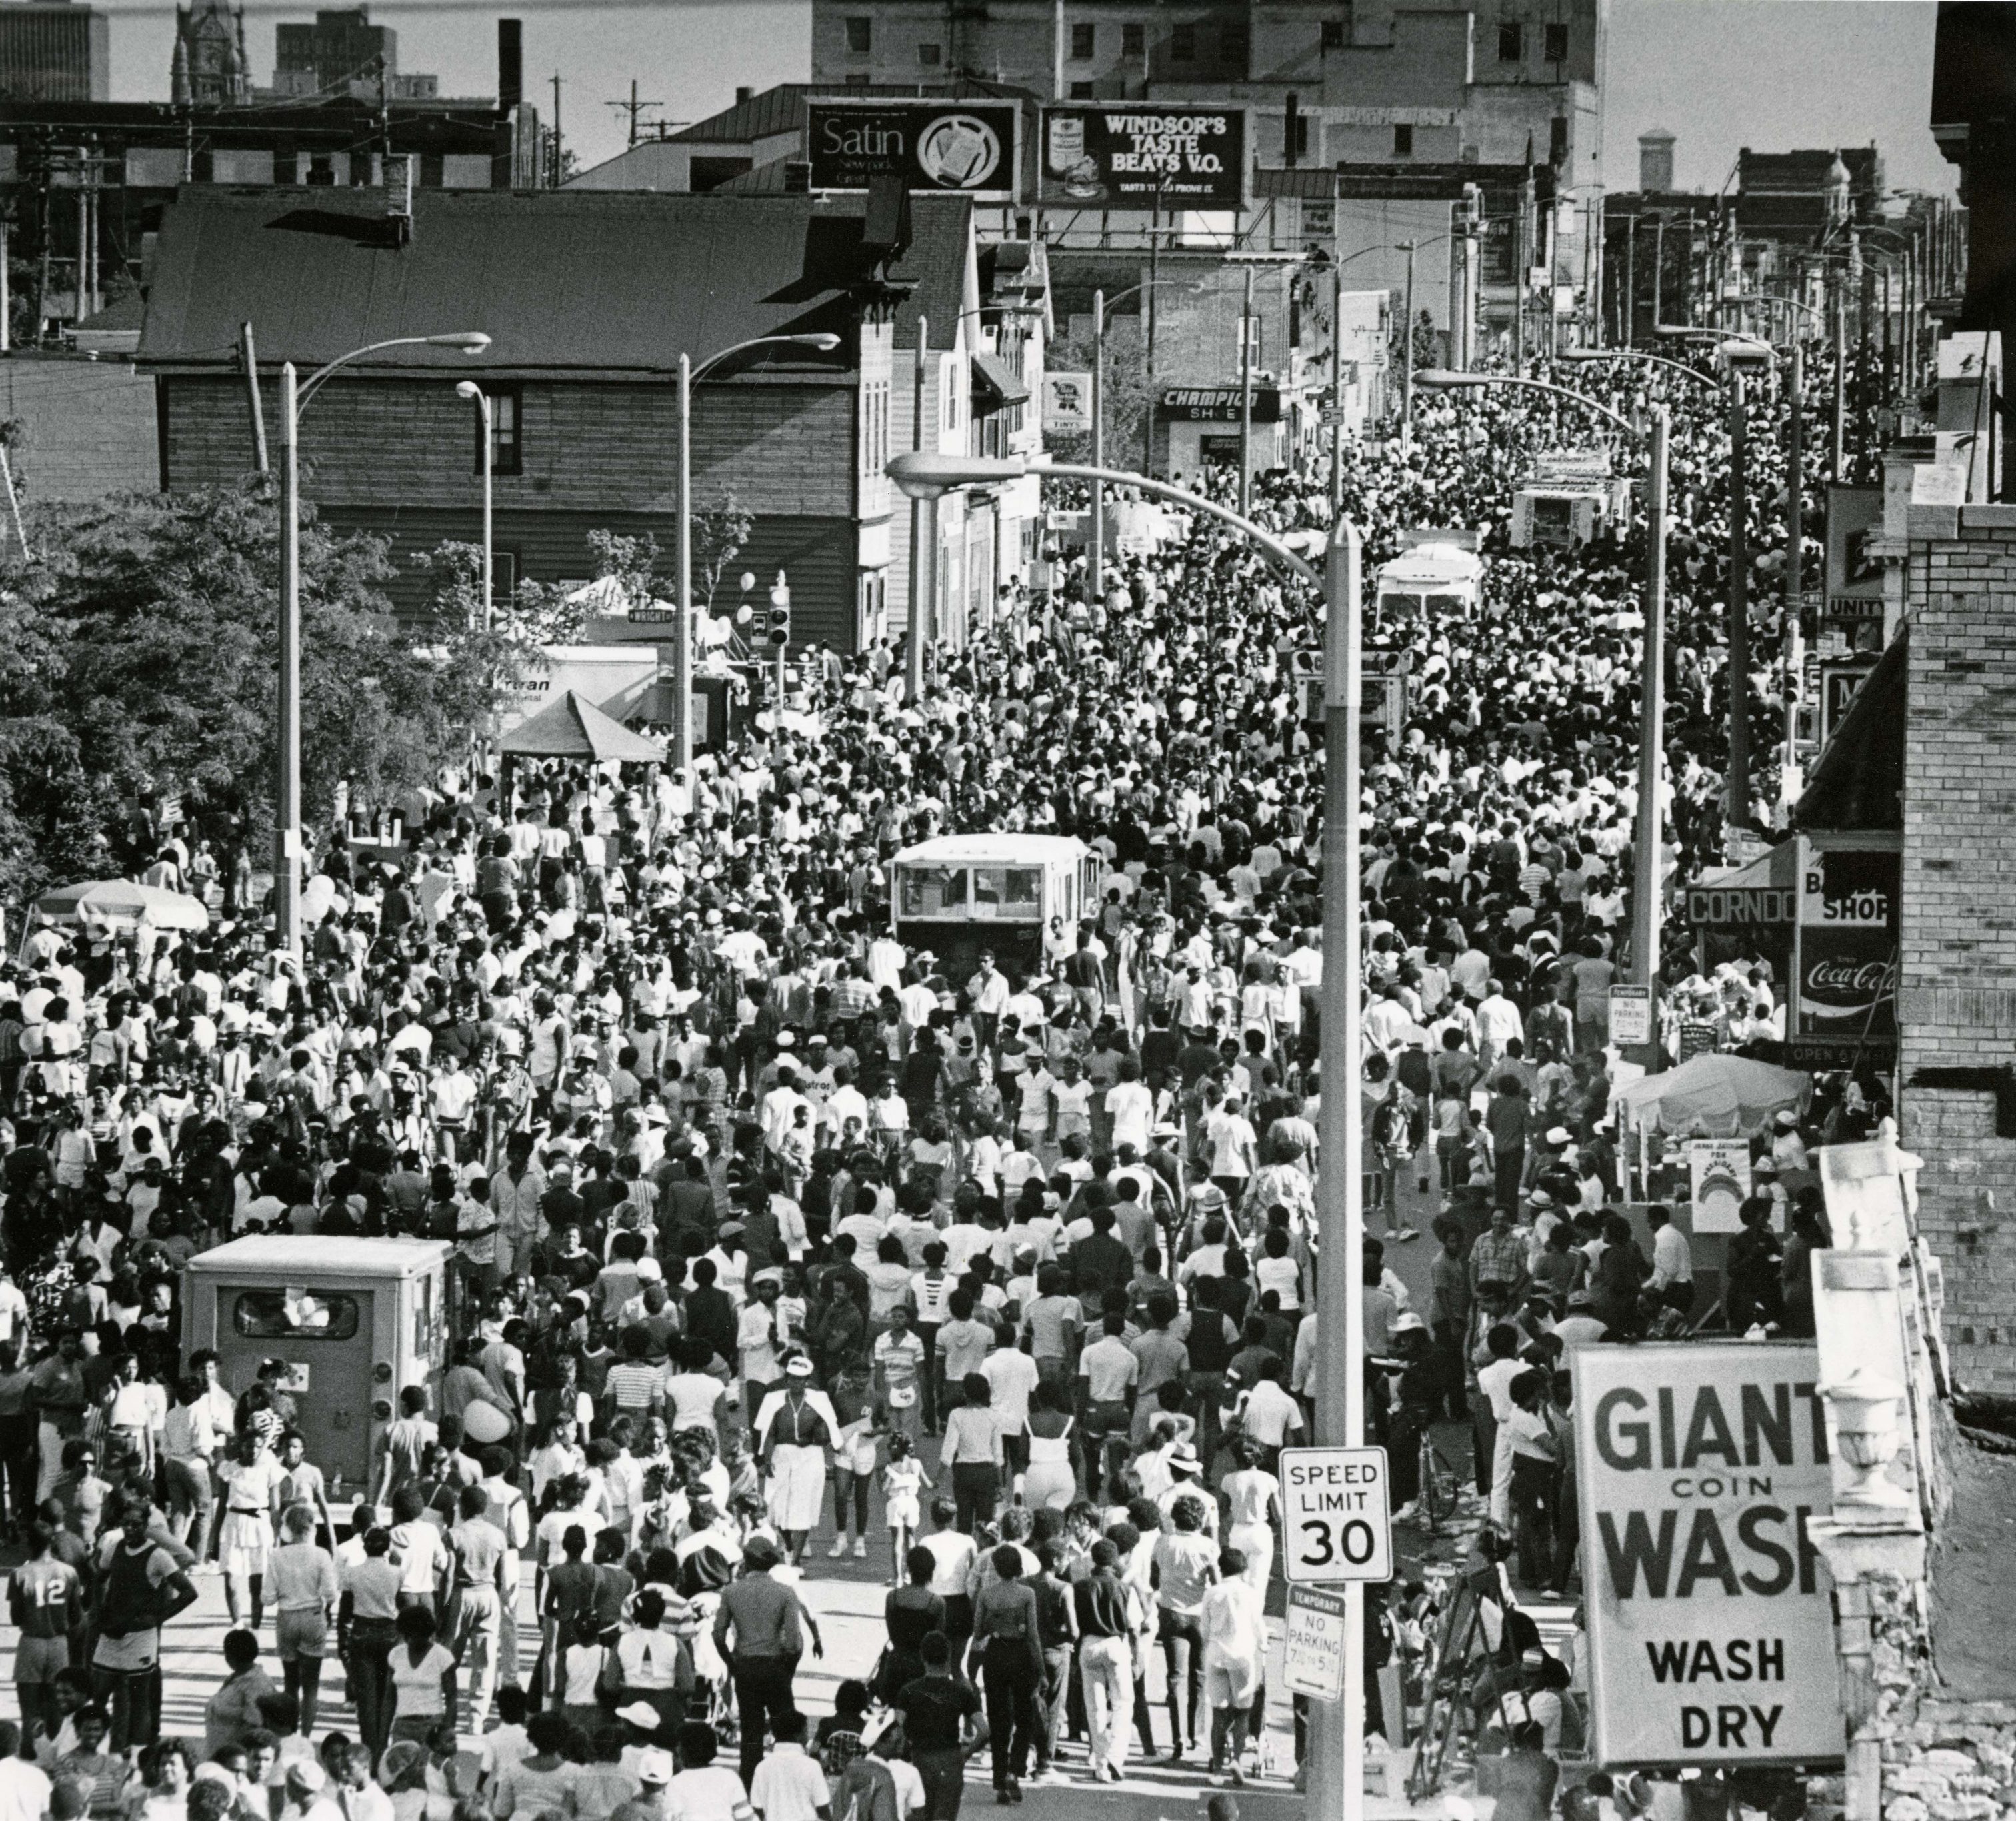 Crowds fill the street for a Juneteenth Day celebration in 1984. Juneteenth Day is observed on June 19th and commemorates the formal end of slavery in the United States. 